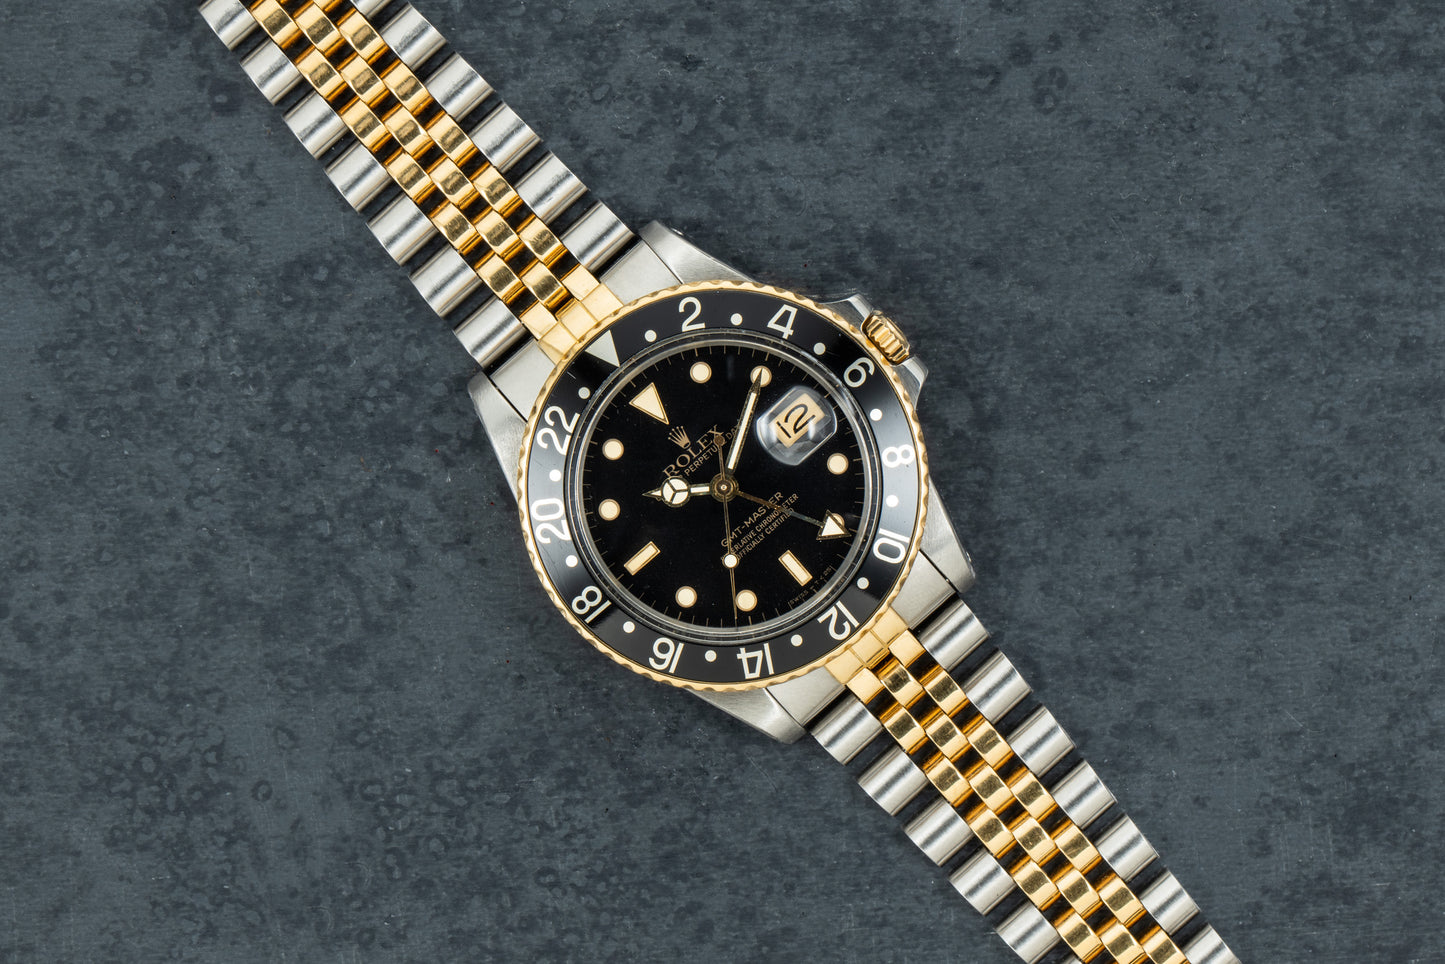 Rolex GMT-Master Two-Tone